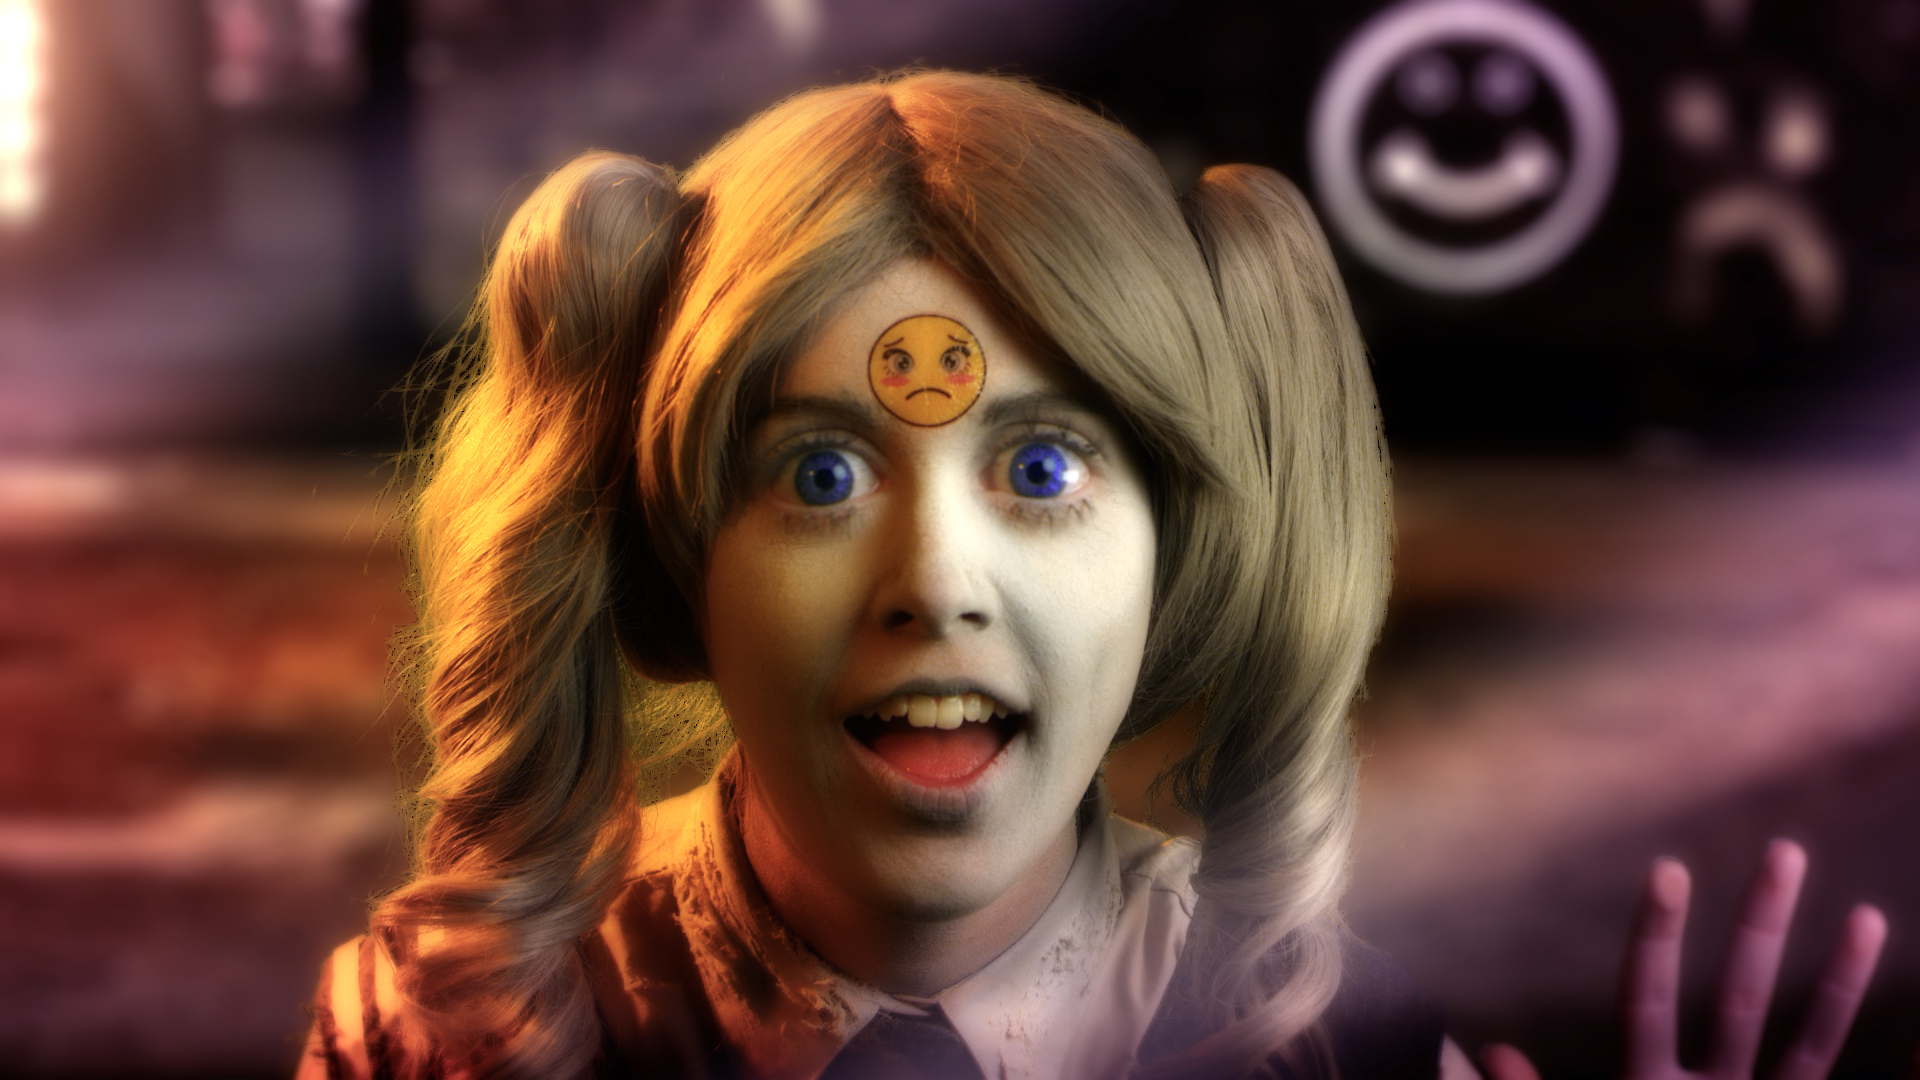 Rachel Maclean Feed Me (2015) Arts Council Collection, Southbank Centre, London Â© the artist. Commissioned by Film and Video Umbrella (FVU) and Hayward Touring for British Art Show 8